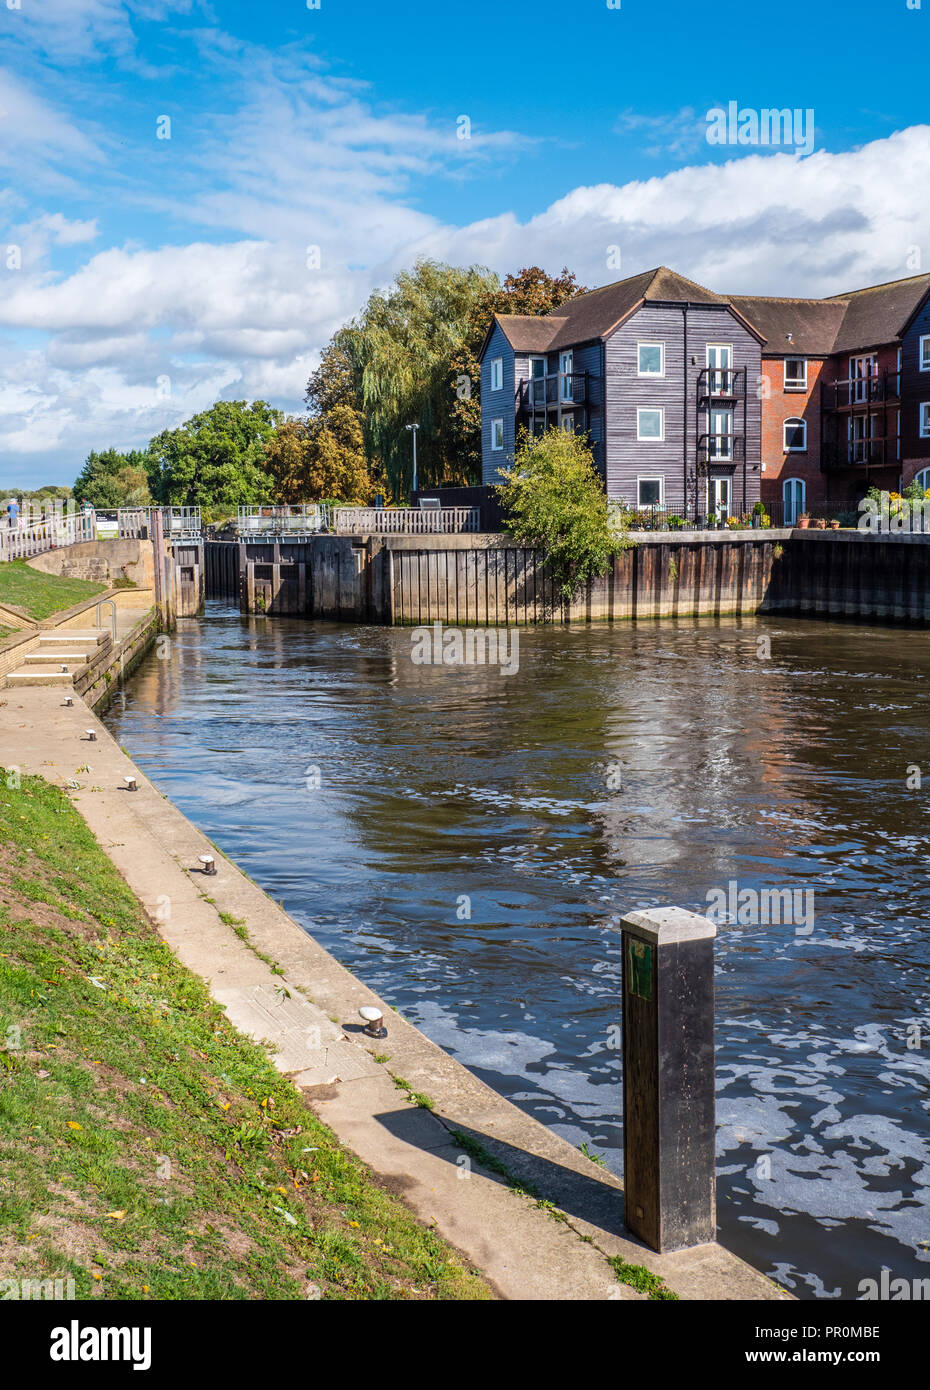 Stanford Lock, Themse, Stanford-on-Thames, Oxford, Oxfordshire, England, UK, GB. Stockfoto